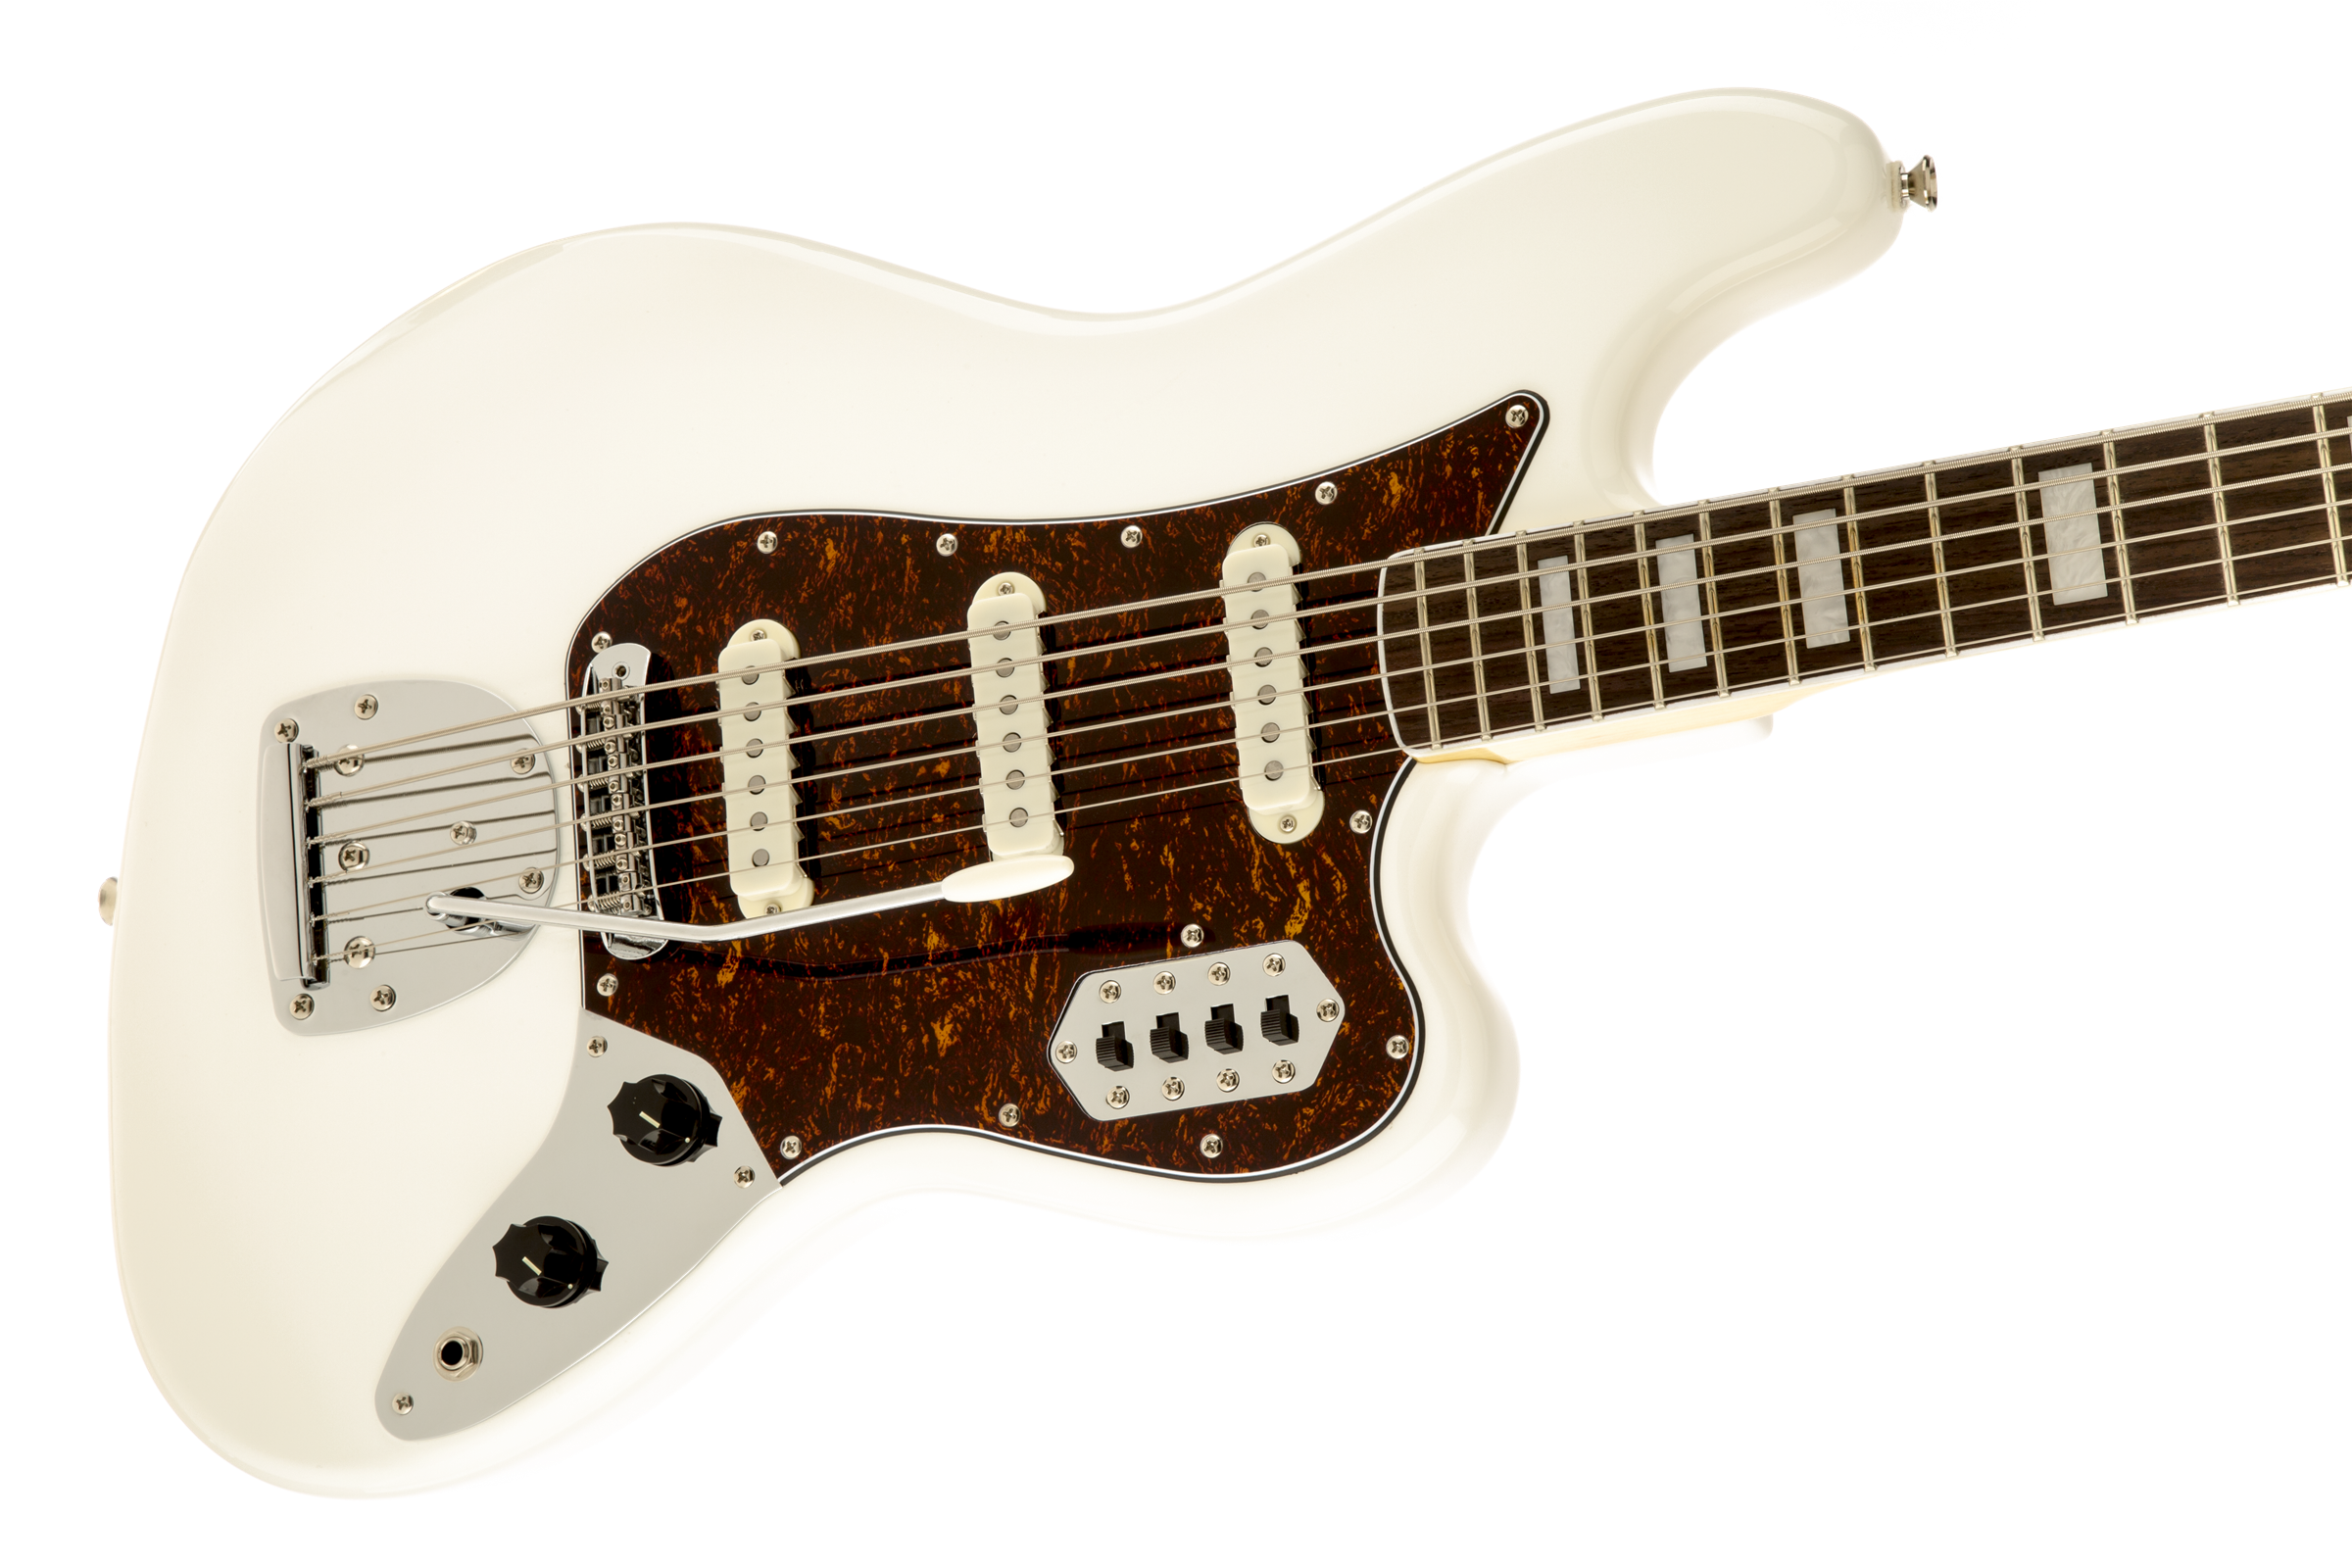 Squier Bass Vi Vintage Modified (rw) - Olympic White - Solidbody E-bass - Variation 2